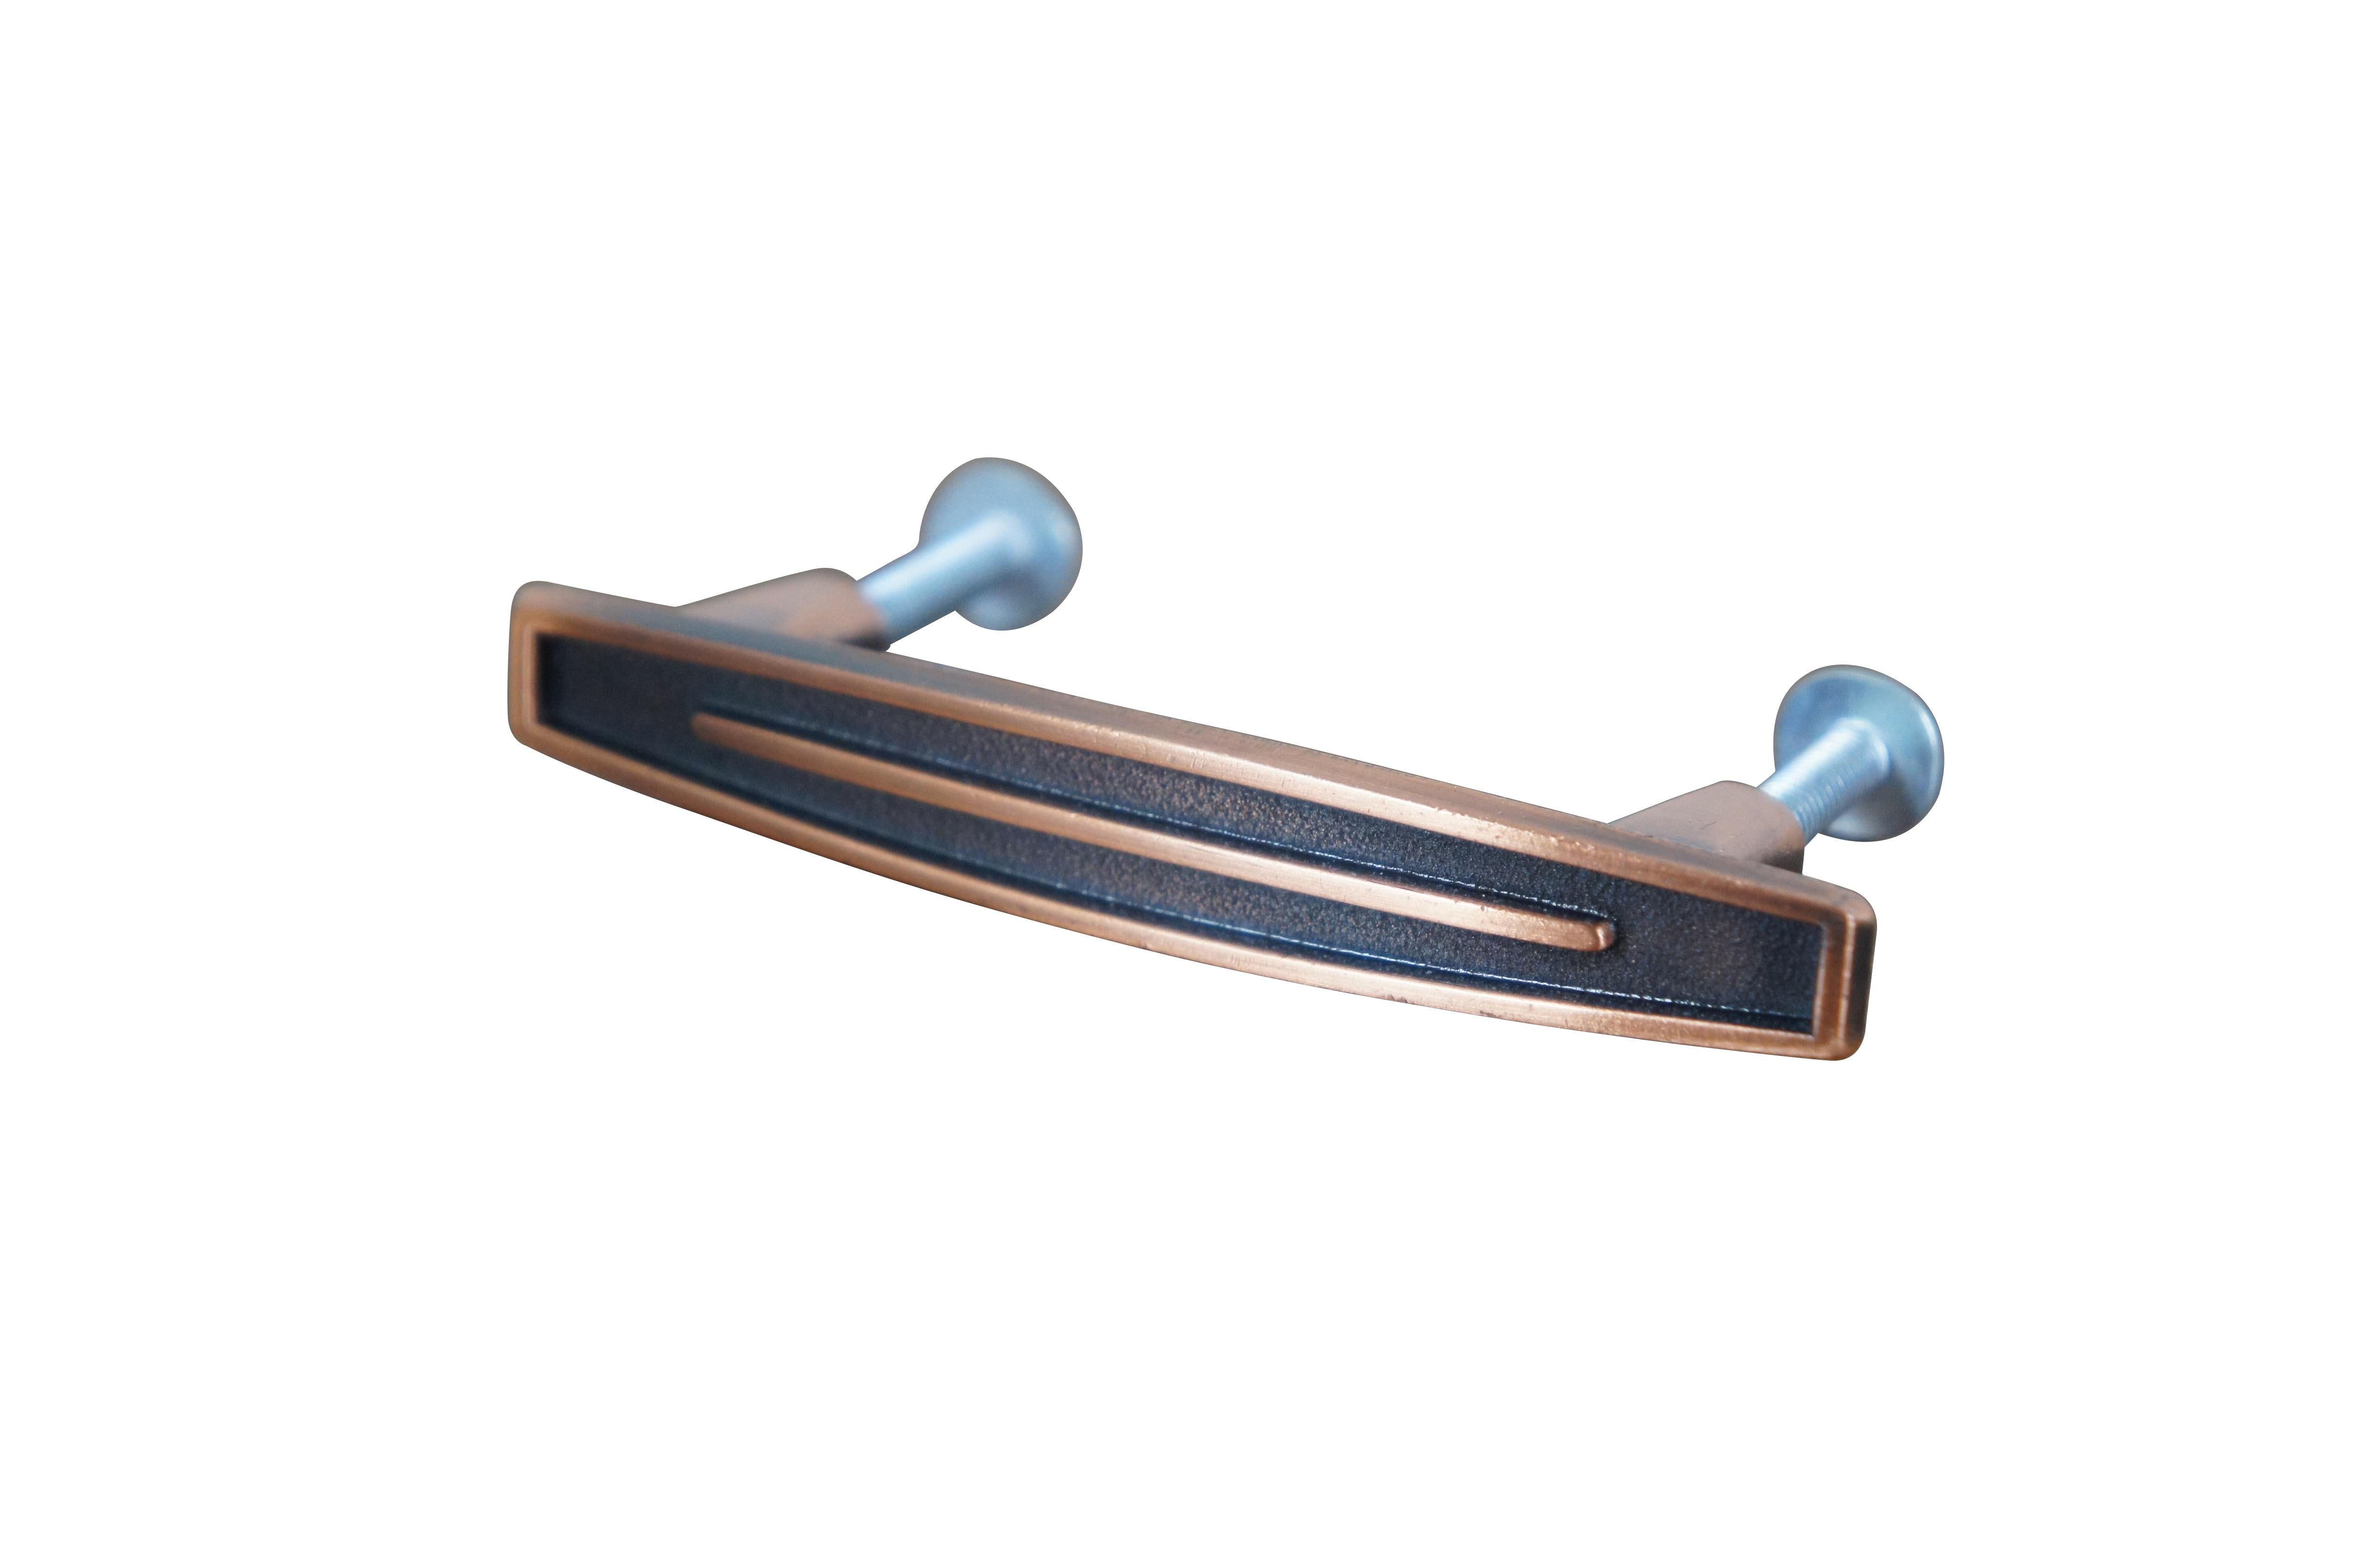 20 Available - Mid to late 20th century old-stock die cast metal drawer / cabinet pulls. National Lock Company - Medalist, item number C634-10D. Antique old copper finish. Mid century modern styling. Bowed out, rounded rectangular shape with